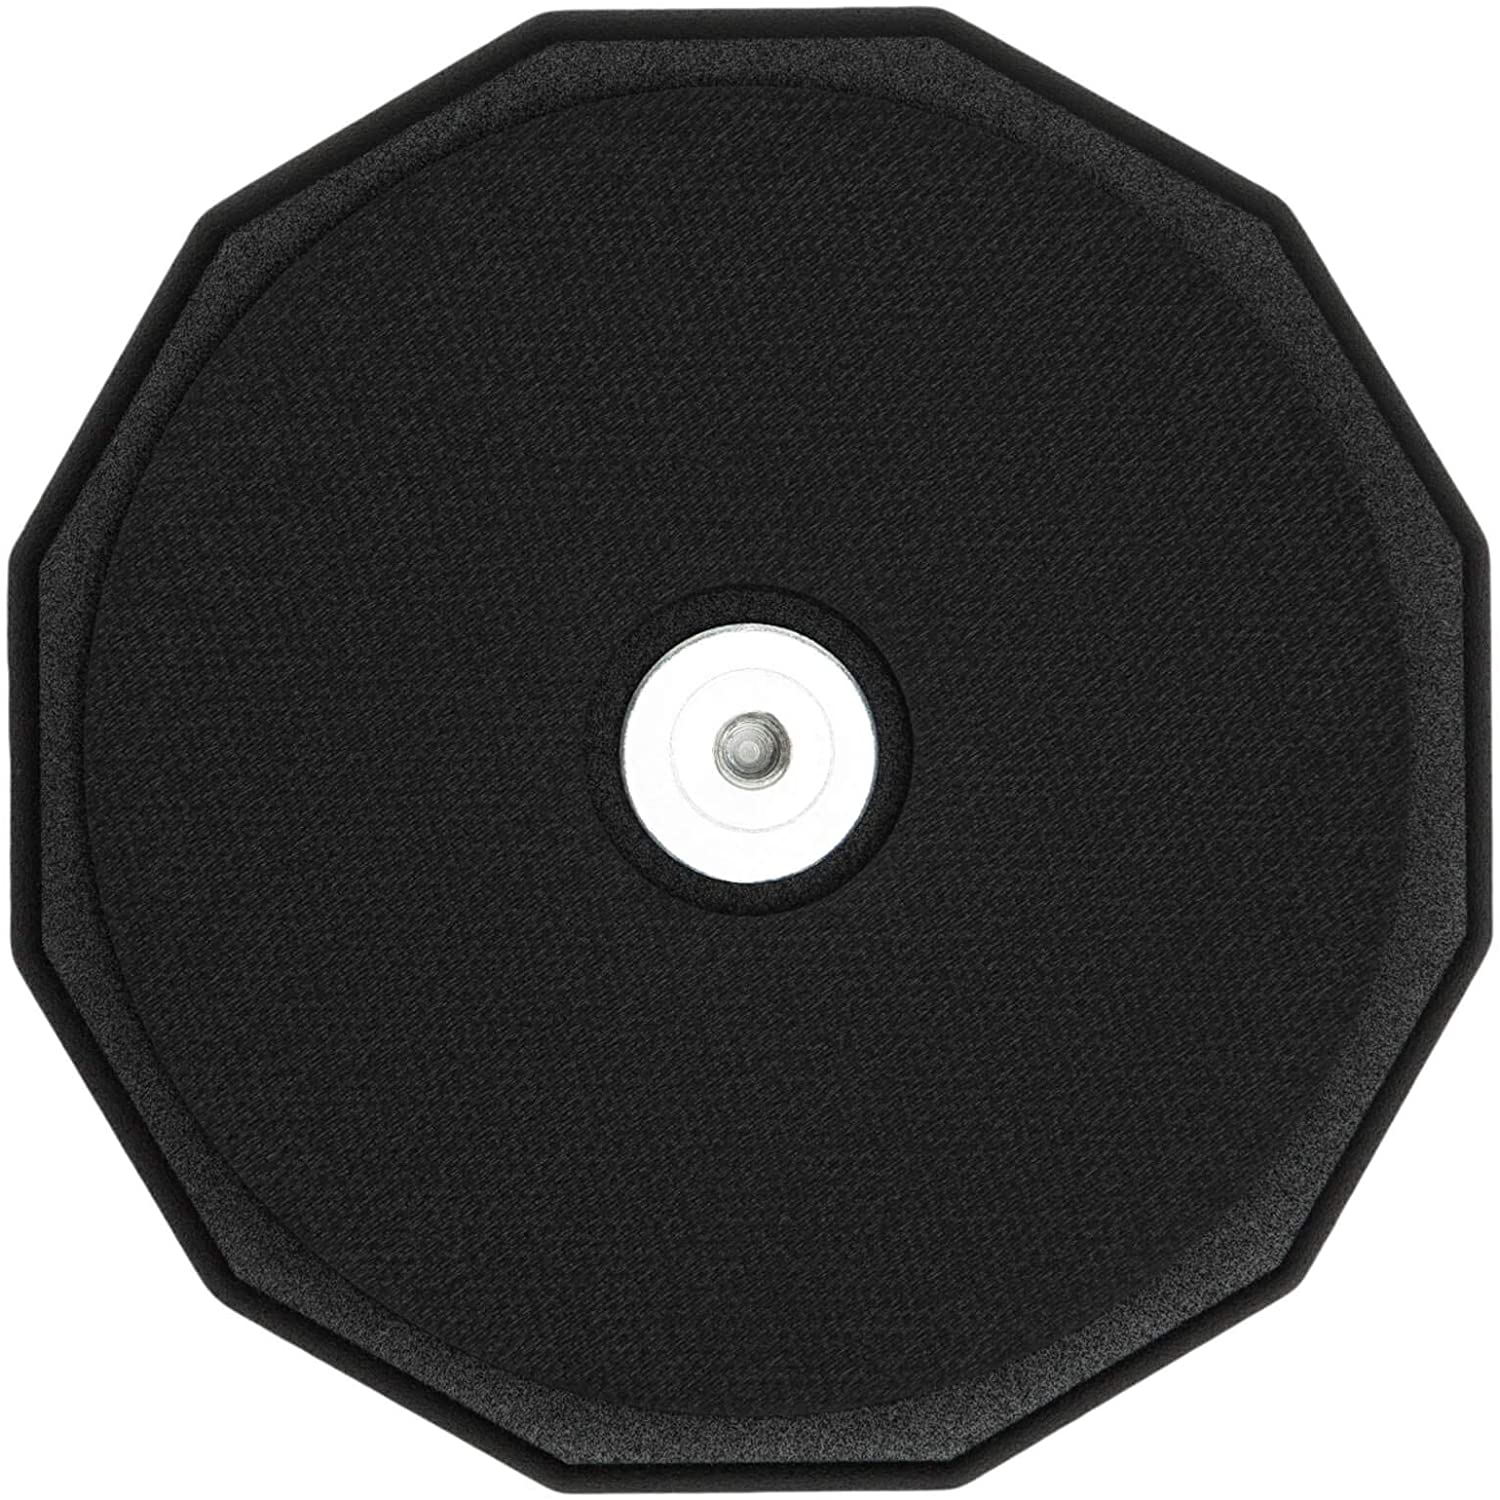 Vic Firth Single Sided Practice Pad - 6 inch